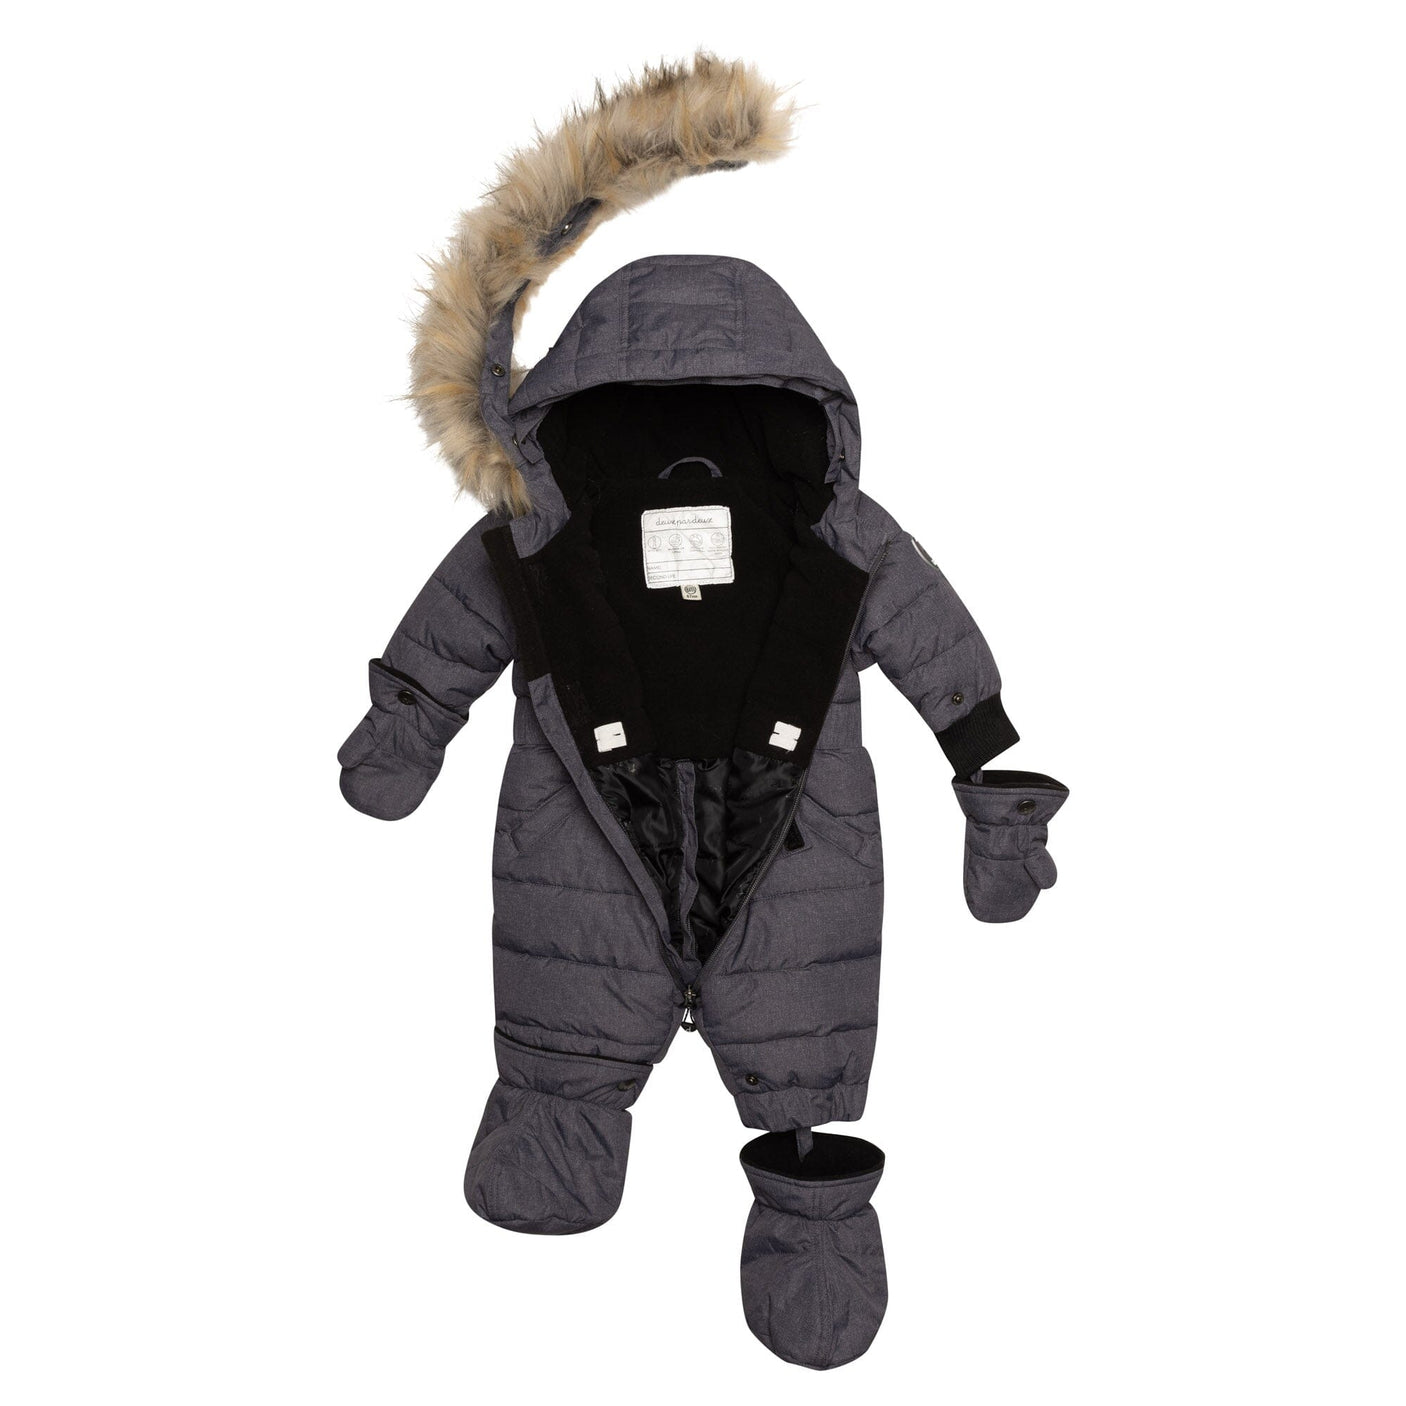 One Piece Baby Snowsuit Grey With Textured Print-3